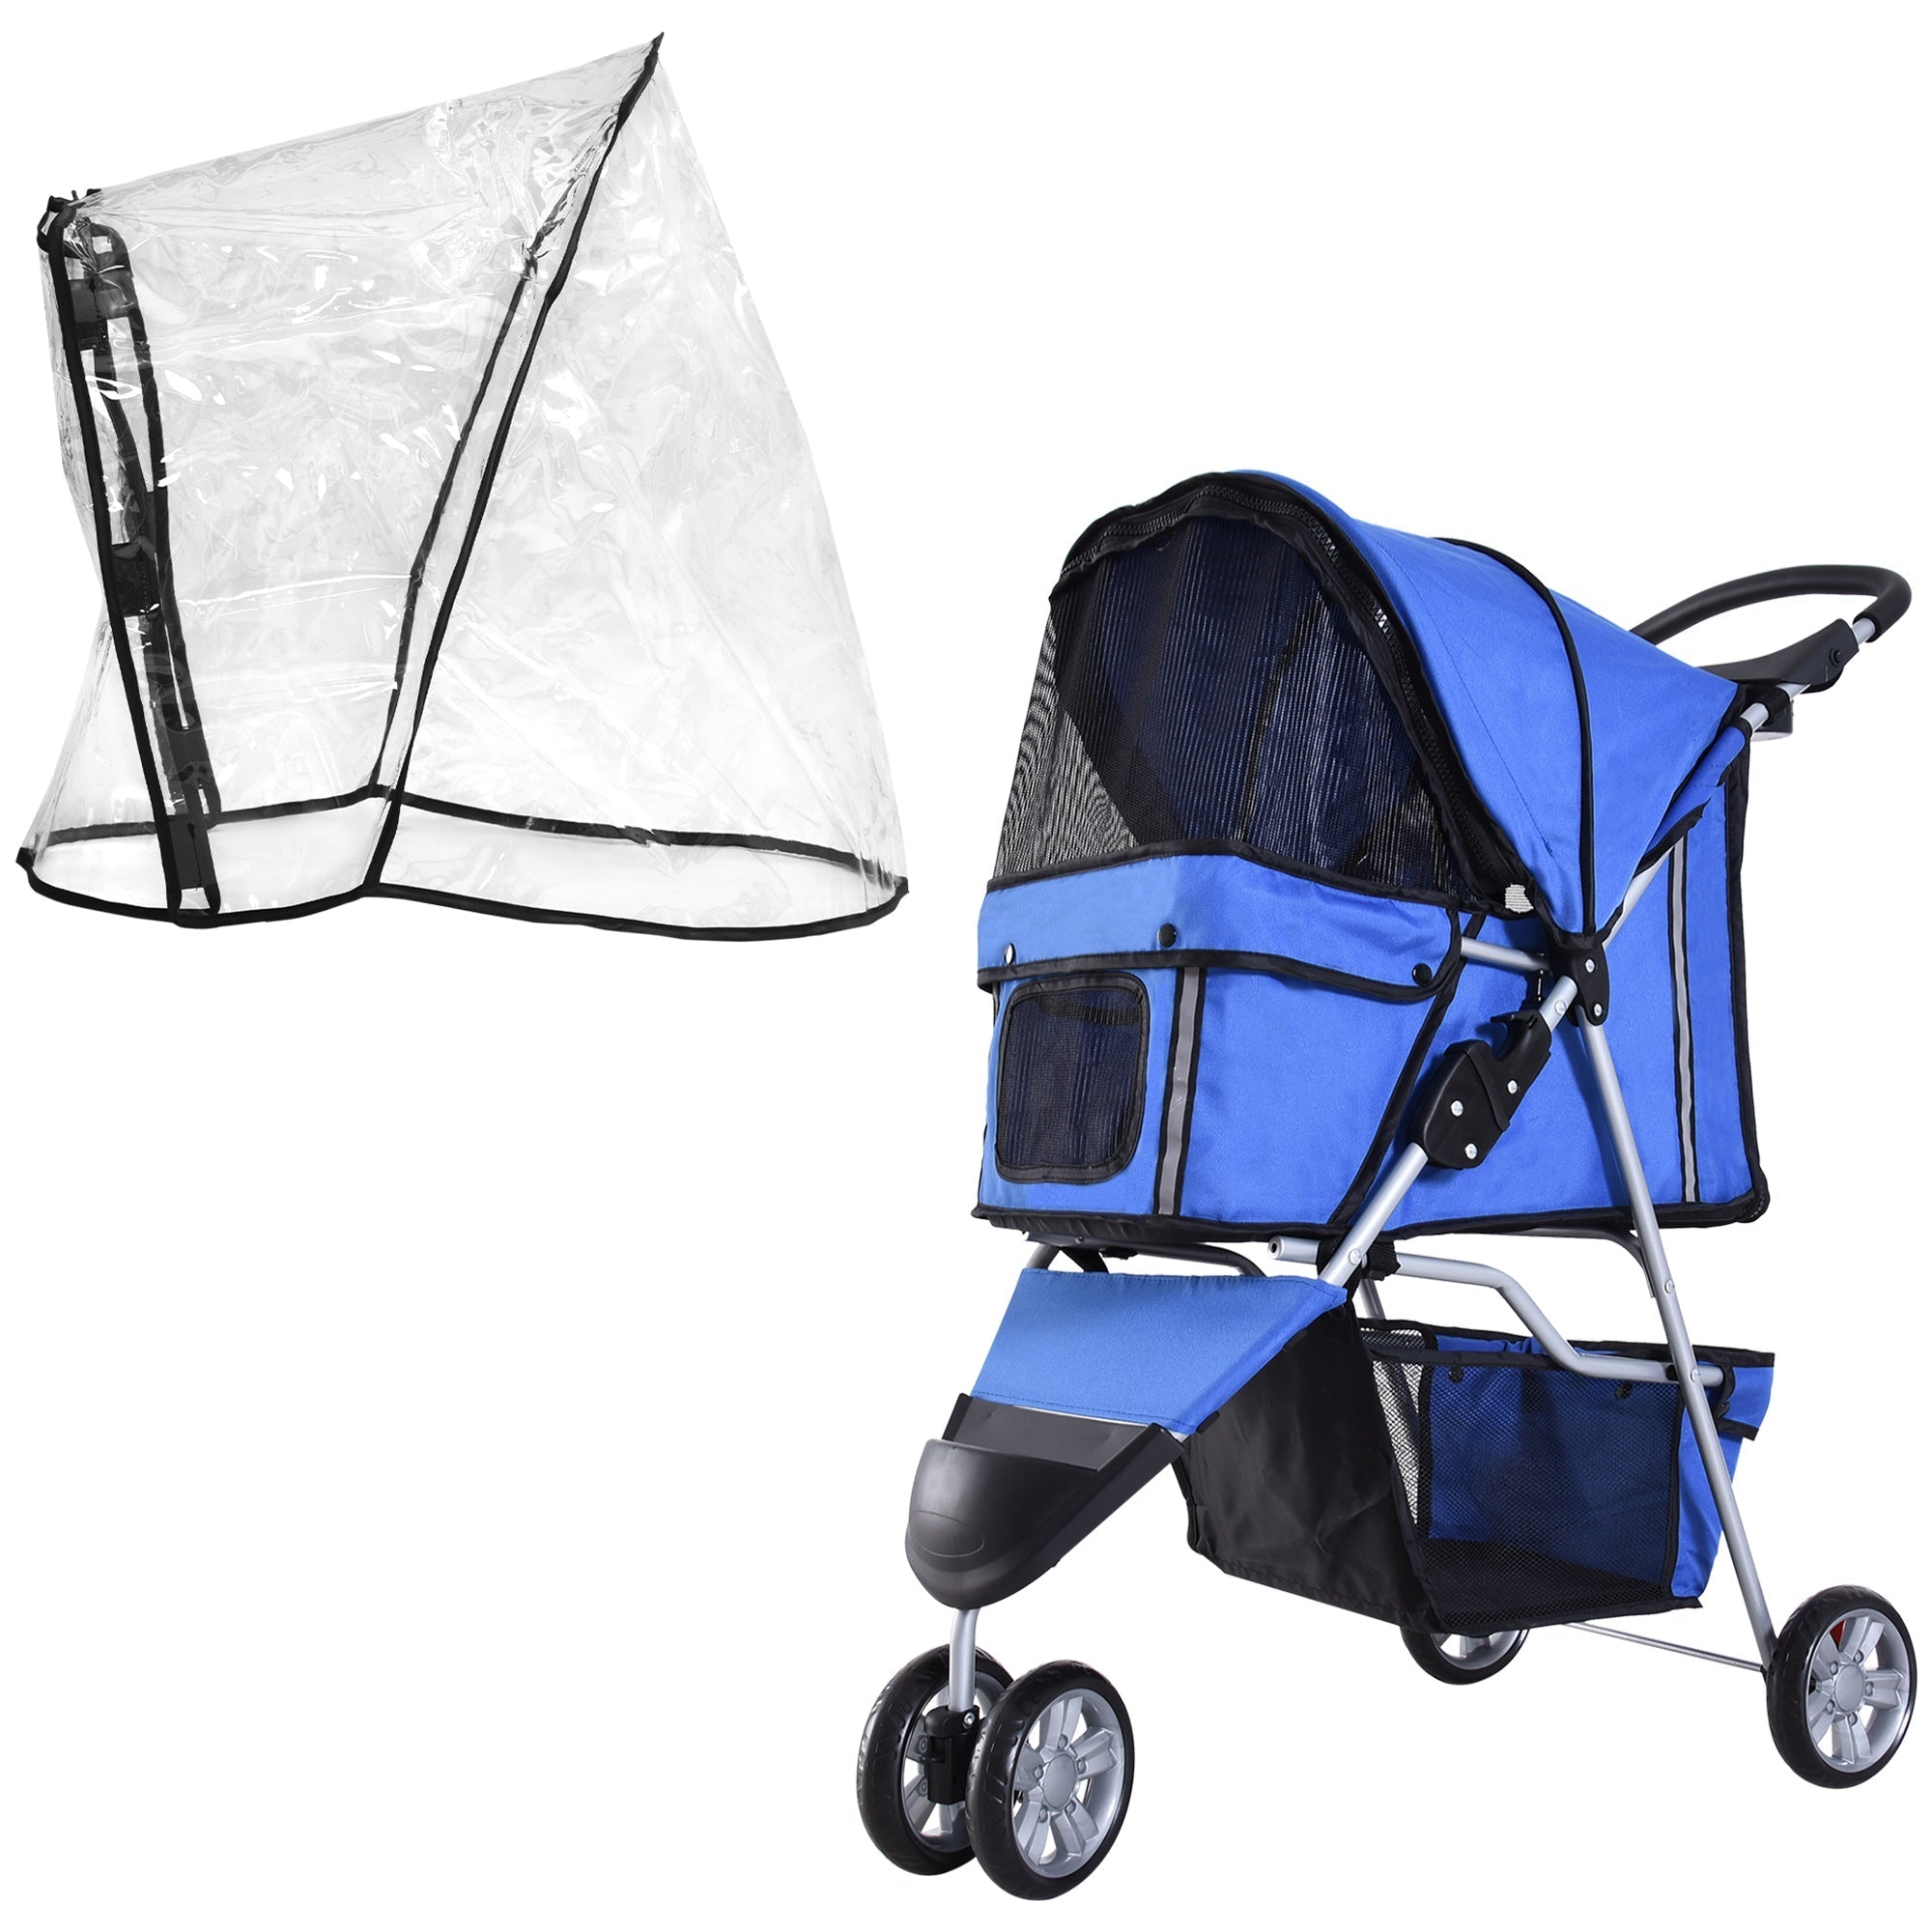 Dog Stroller with Cover for Small Miniature Dogs, Folding Cat Pram Dog Pushchair with Cup Holder, Storage Basket, Reflective Strips, PawHut, Blue